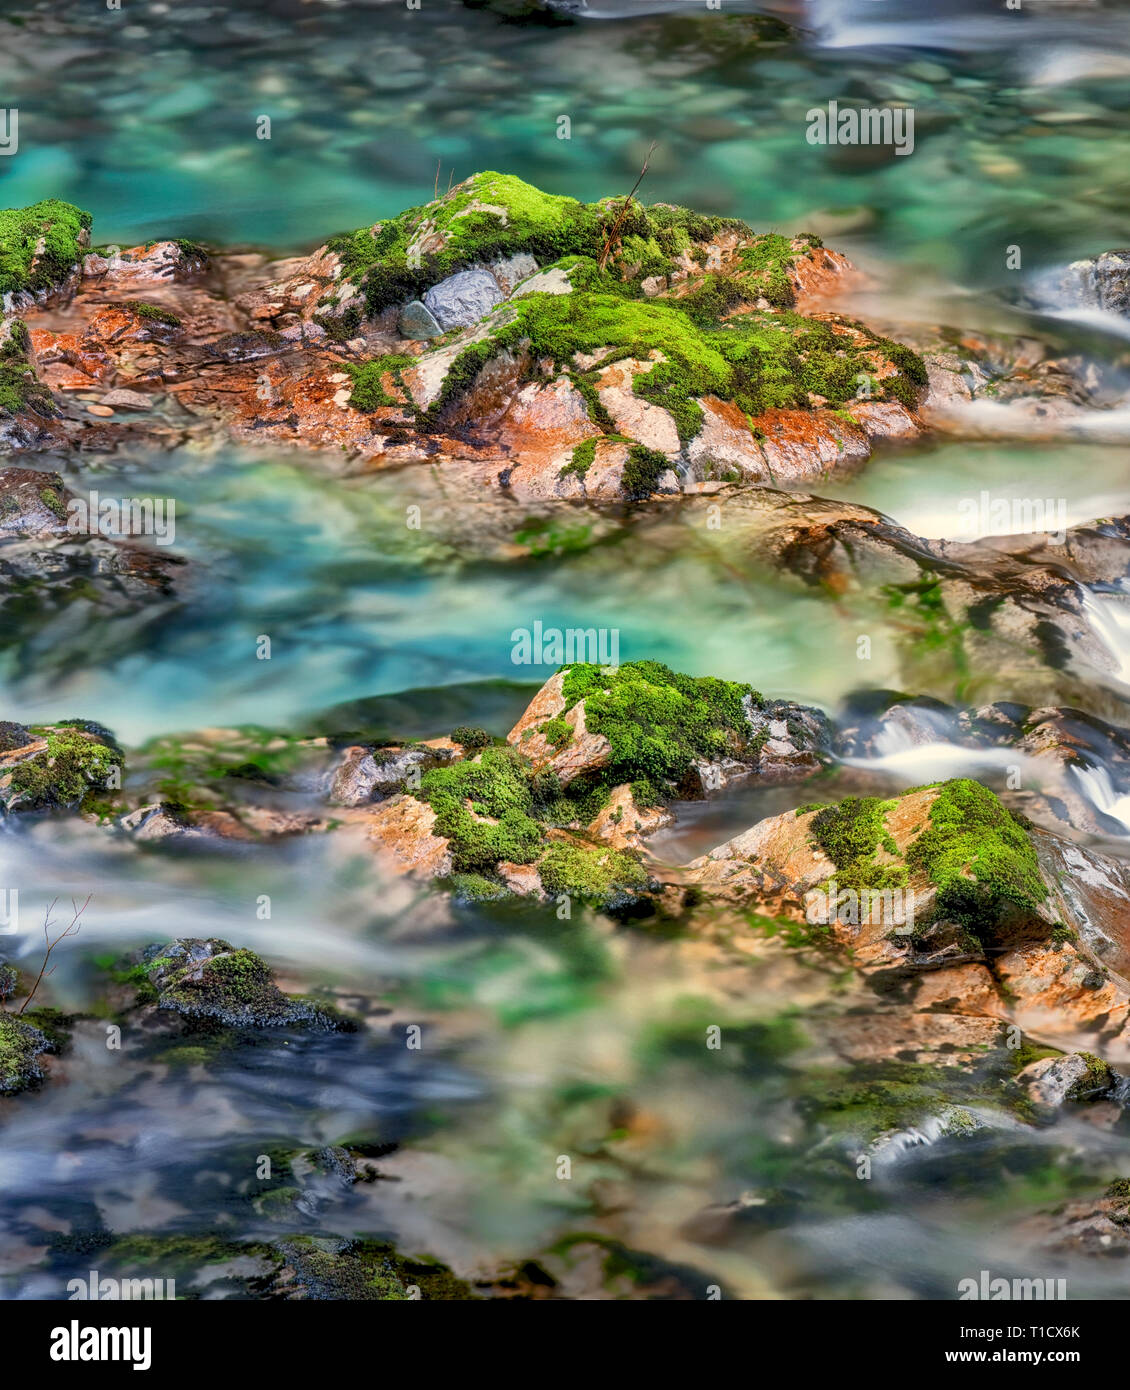 Little North Santiam River with colorful rocks and pools. Opal Creek Scenic Recreation Area, Oregon Stock Photo